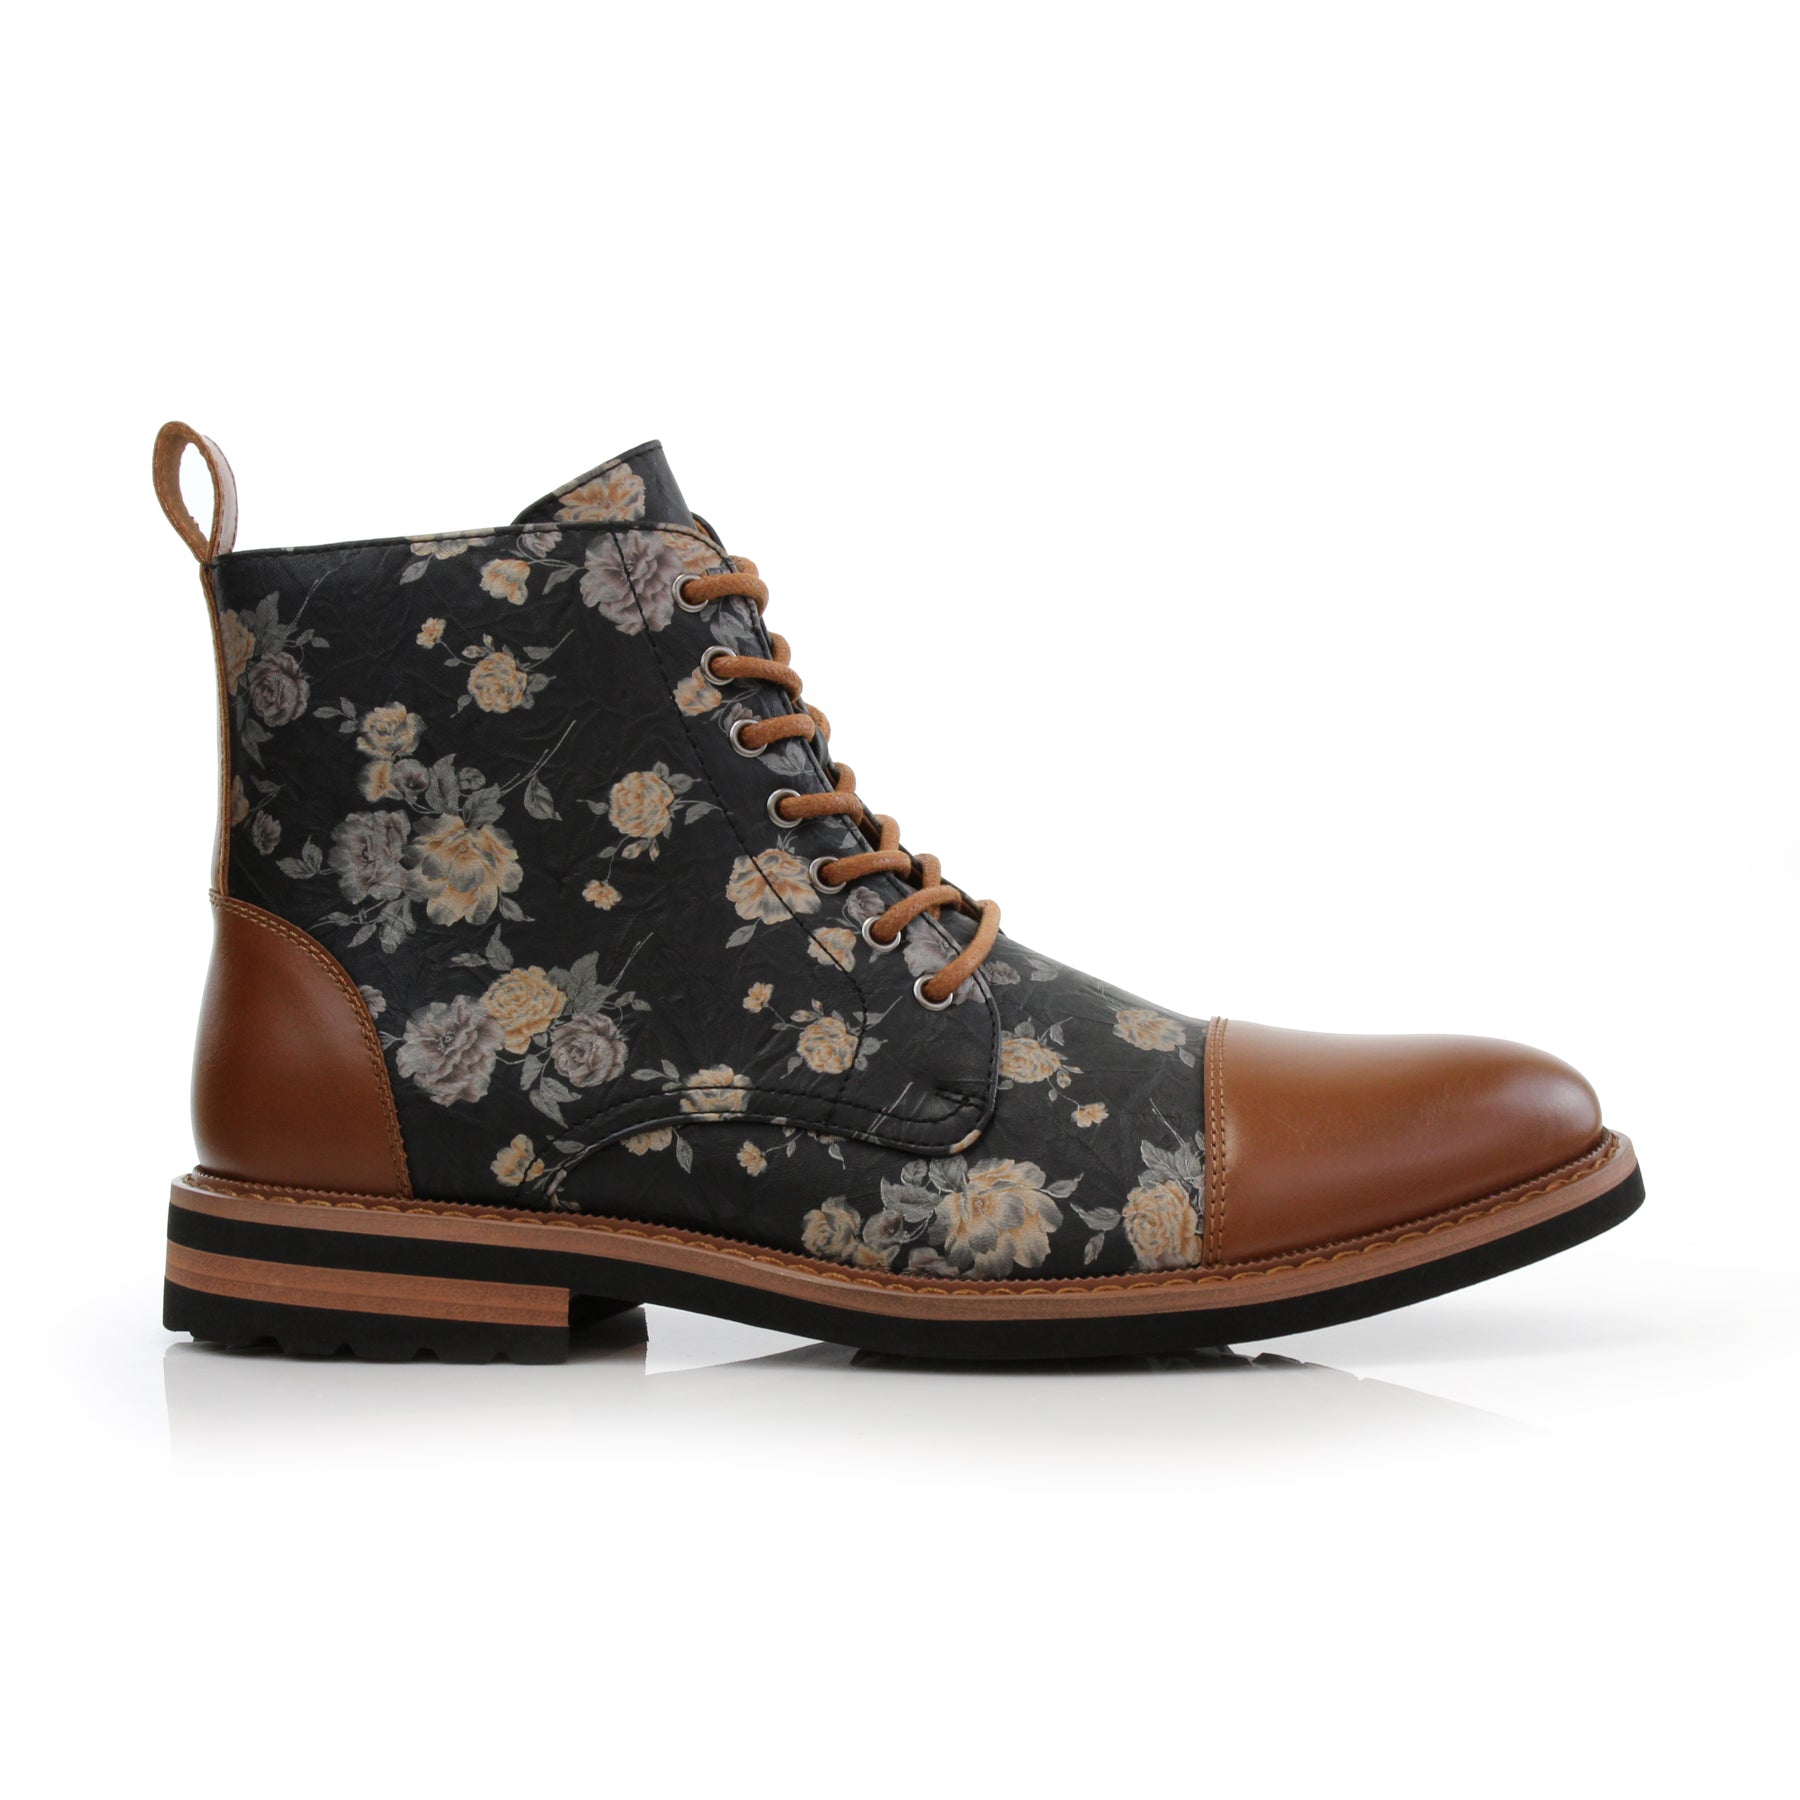 Floral High-Top Boot | Brooke by Polar Fox | Conal Footwear | Outer Side Angle View